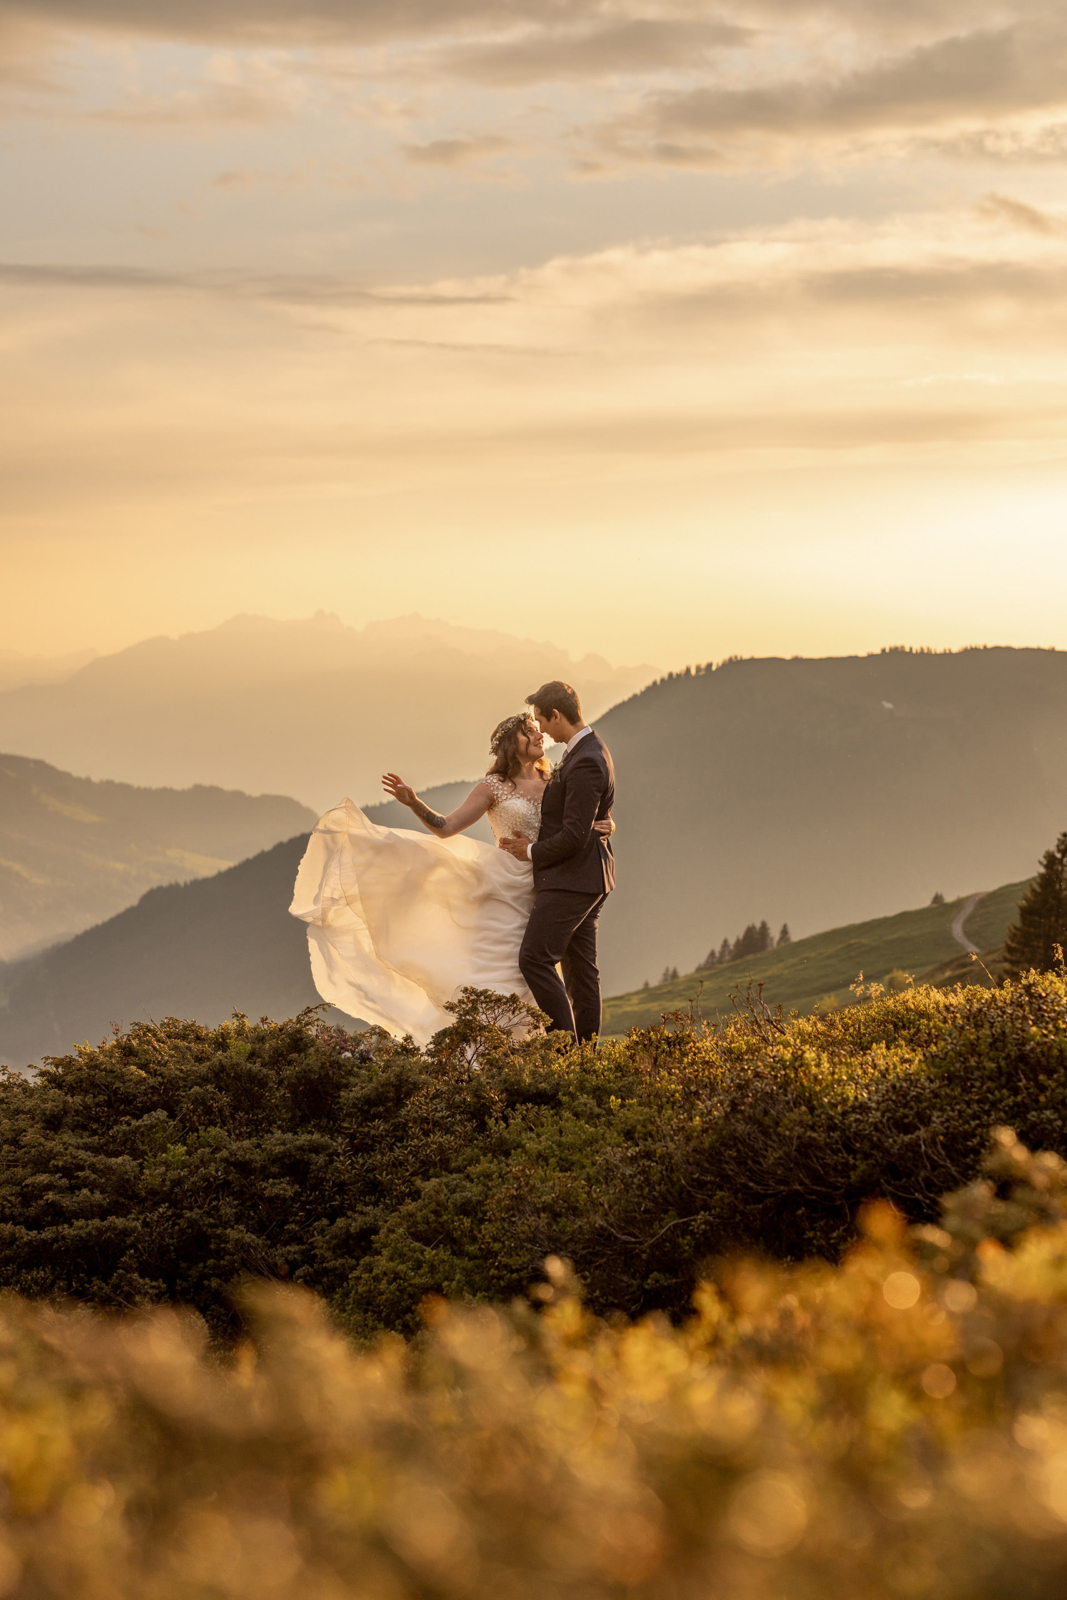 After wedding photos in austria in the mountains